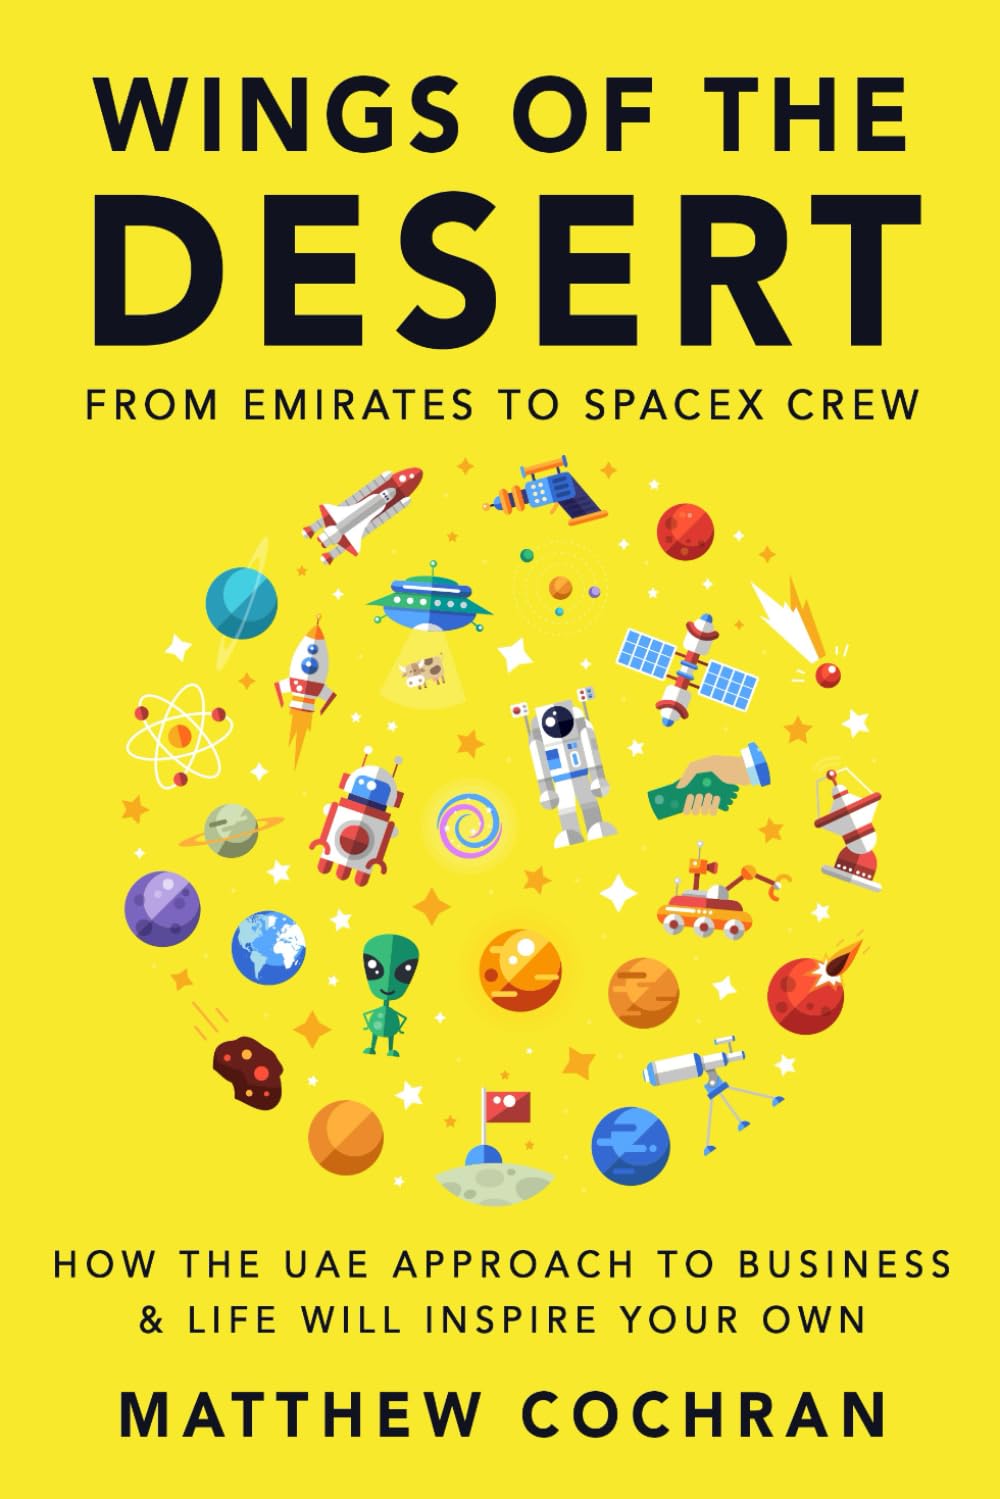 WINGS OF THE DESERT: FROM EMIRATES TO SPACEX CREW HOW THE UAE APPROACH TO BUSINESS & LIFE WILL INSPIRE YOUR OWN